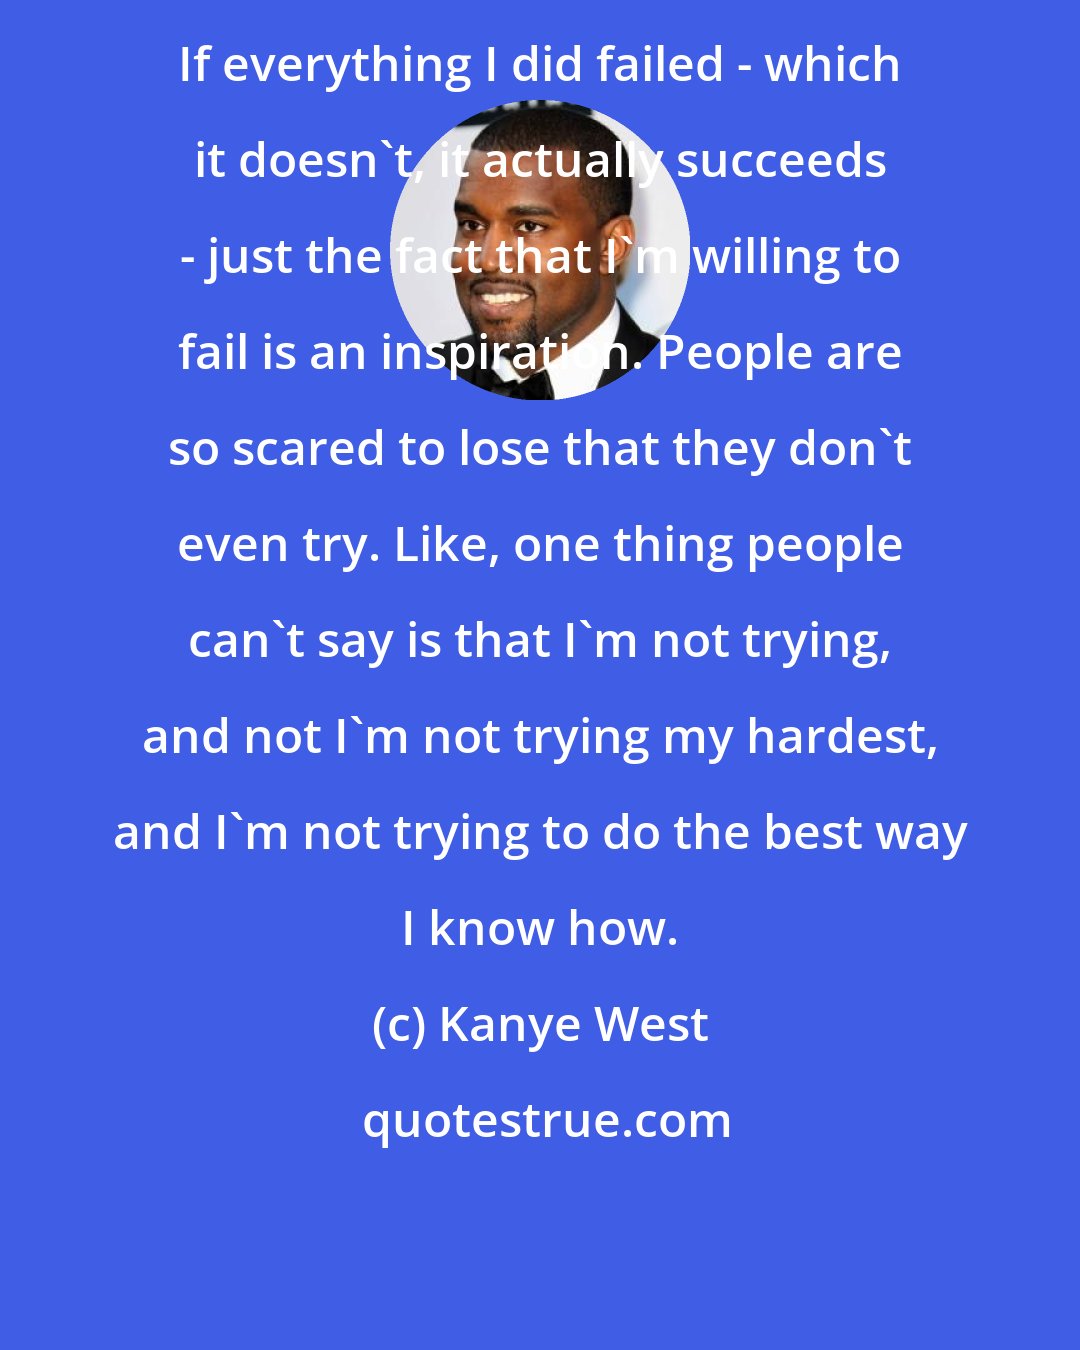 Kanye West: If everything I did failed - which it doesn't, it actually succeeds - just the fact that I'm willing to fail is an inspiration. People are so scared to lose that they don't even try. Like, one thing people can't say is that I'm not trying, and not I'm not trying my hardest, and I'm not trying to do the best way I know how.